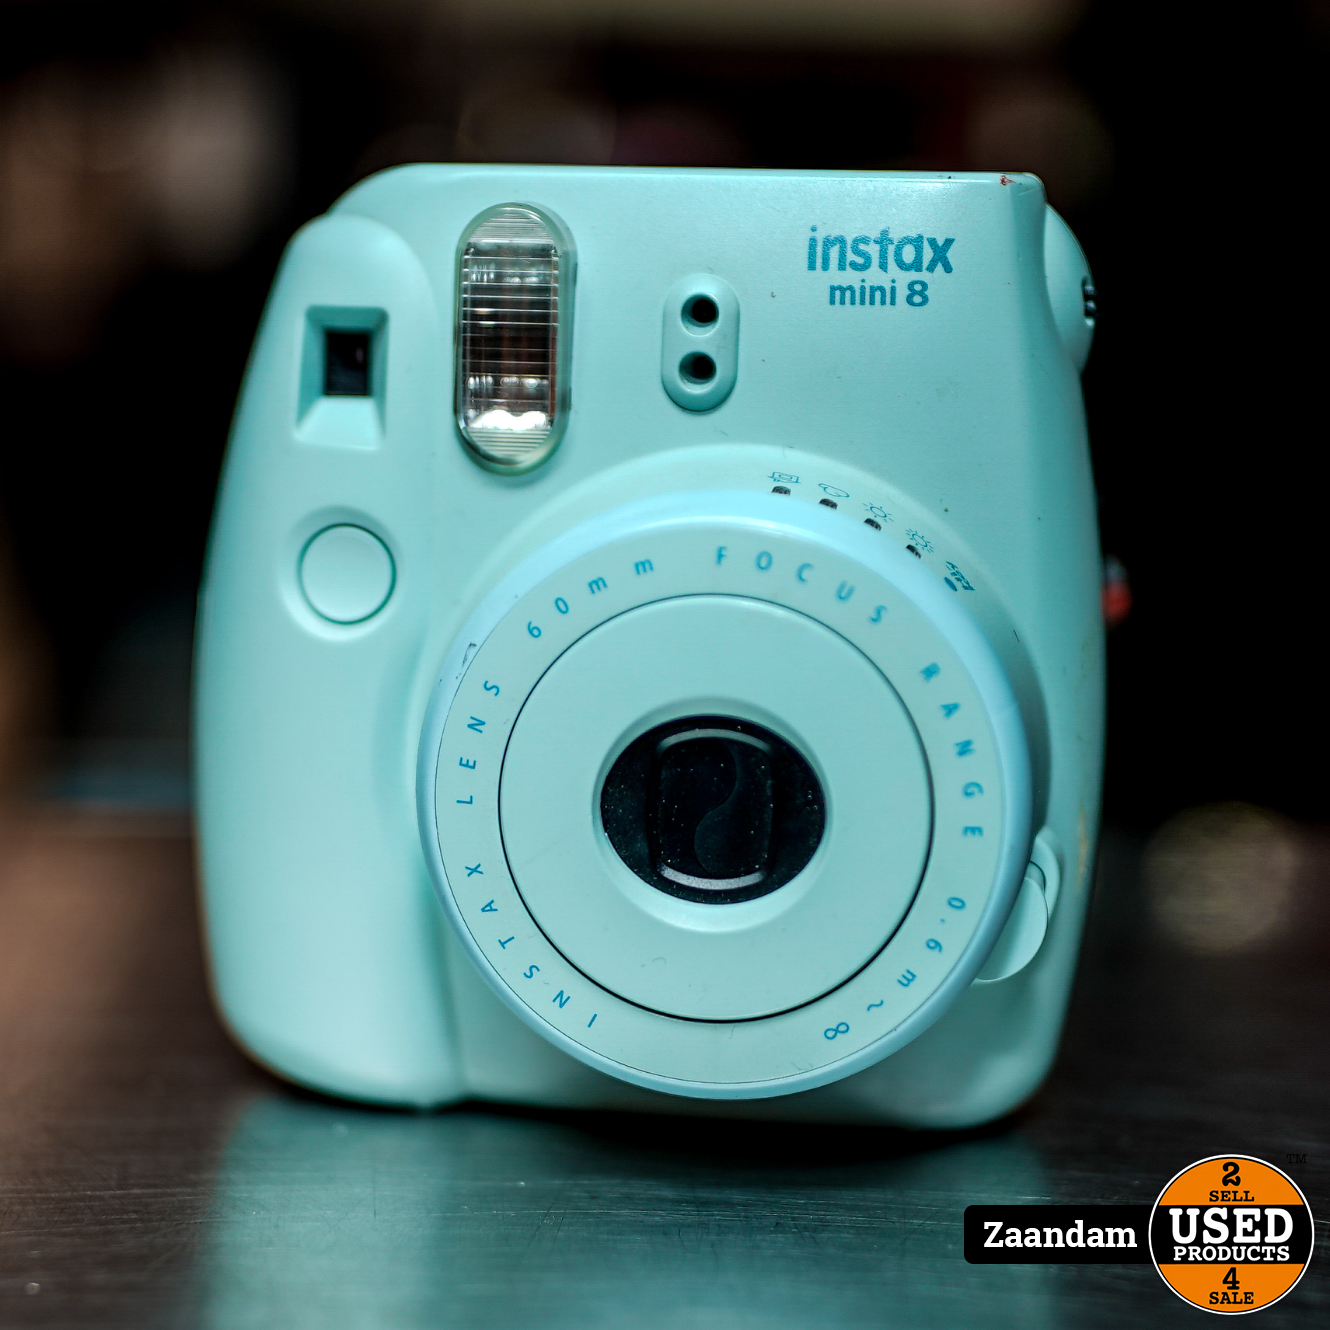 Fujifilm Instax Mini 8 Camera | In nette staat - Used Products